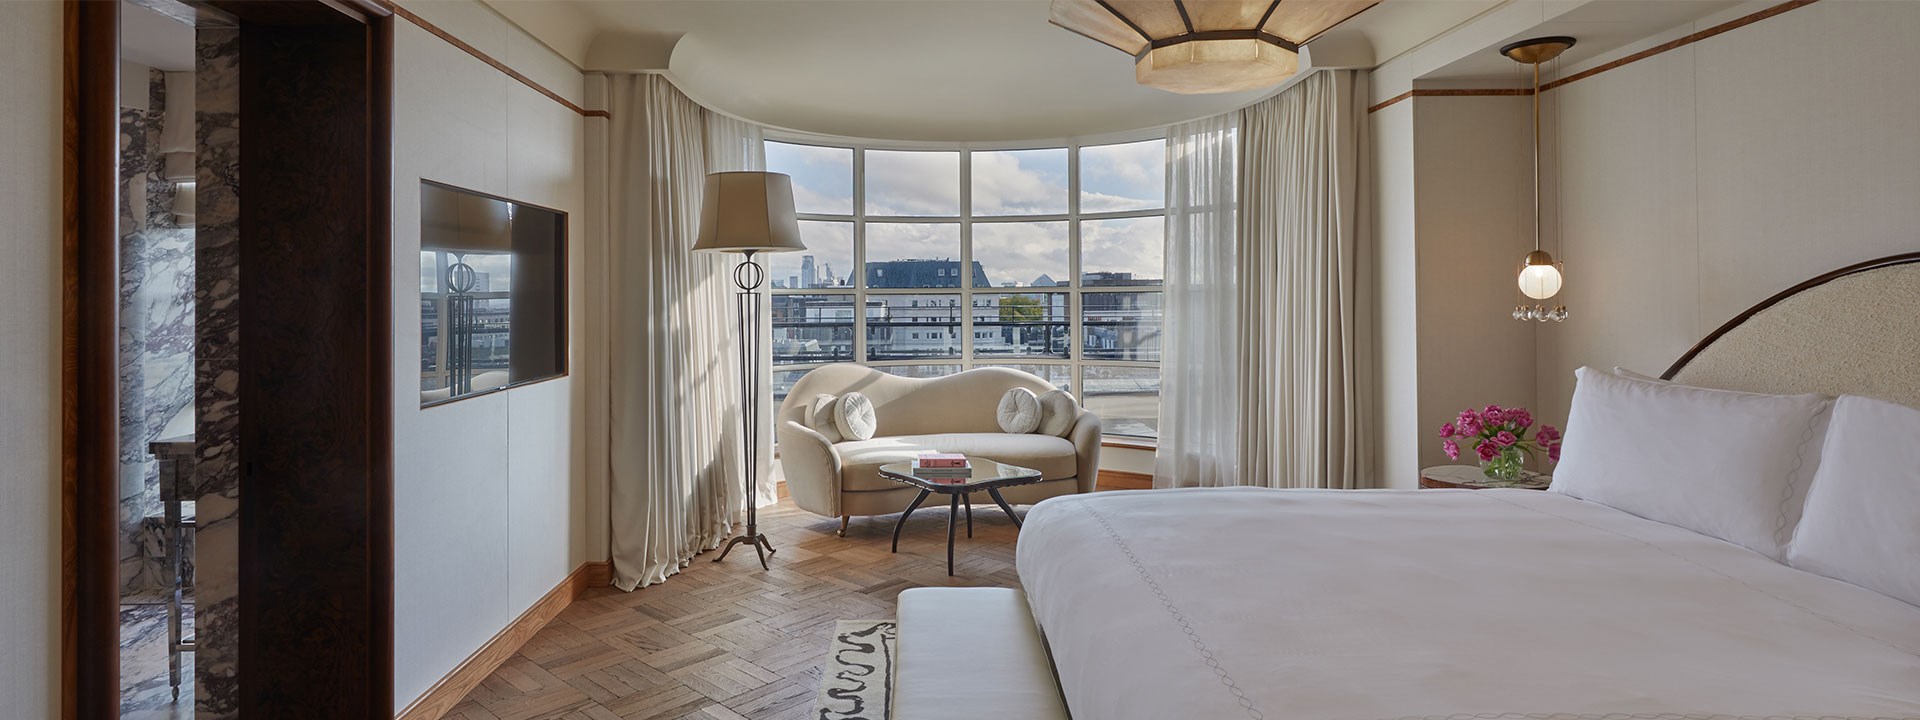 Bedroom at The Mews Terrace Suite